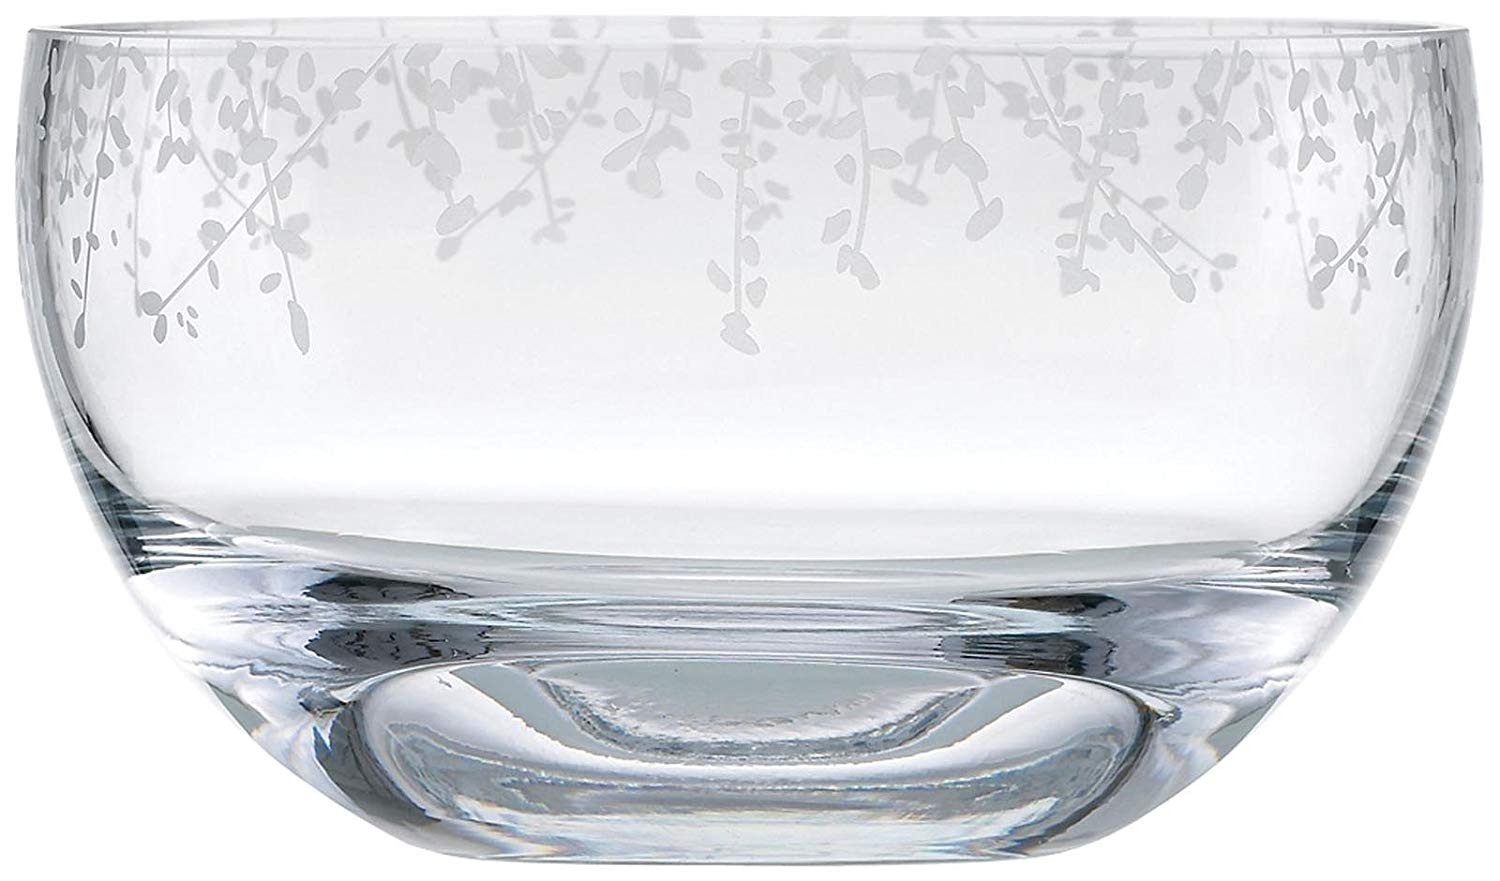 27 Stylish Marquis by Waterford Newberry Vase 10 2024 free download marquis by waterford newberry vase 10 of amazon com kate spade new york gardner street crystal large bowl 7 pertaining to amazon com kate spade new york gardner street crystal large bowl 7 k